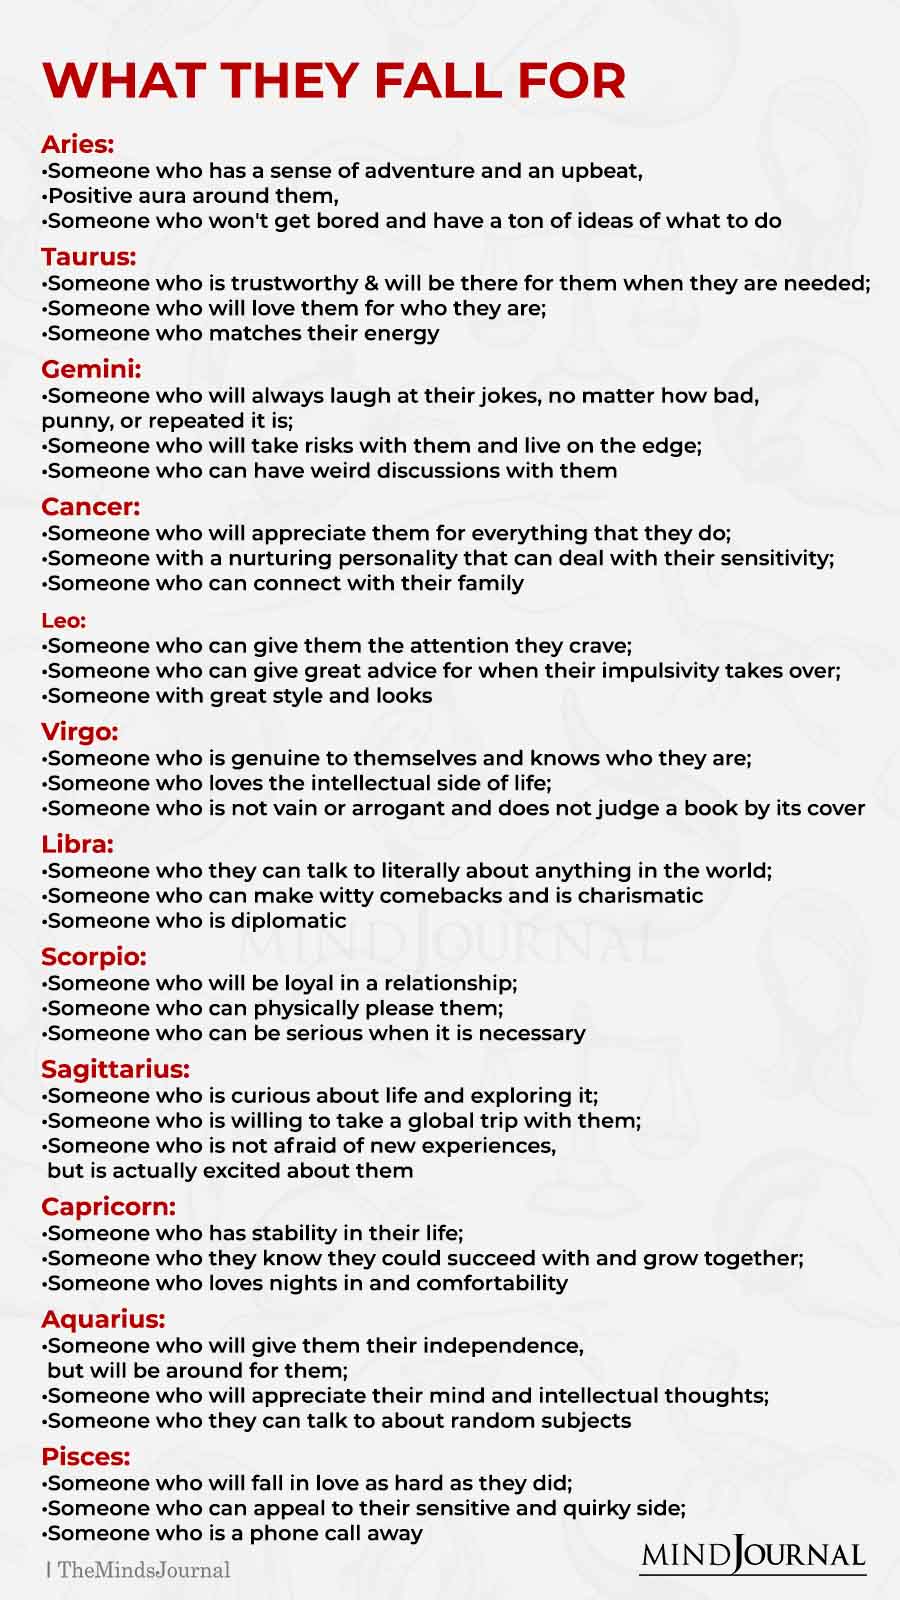 What The Zodiac Signs Fall For